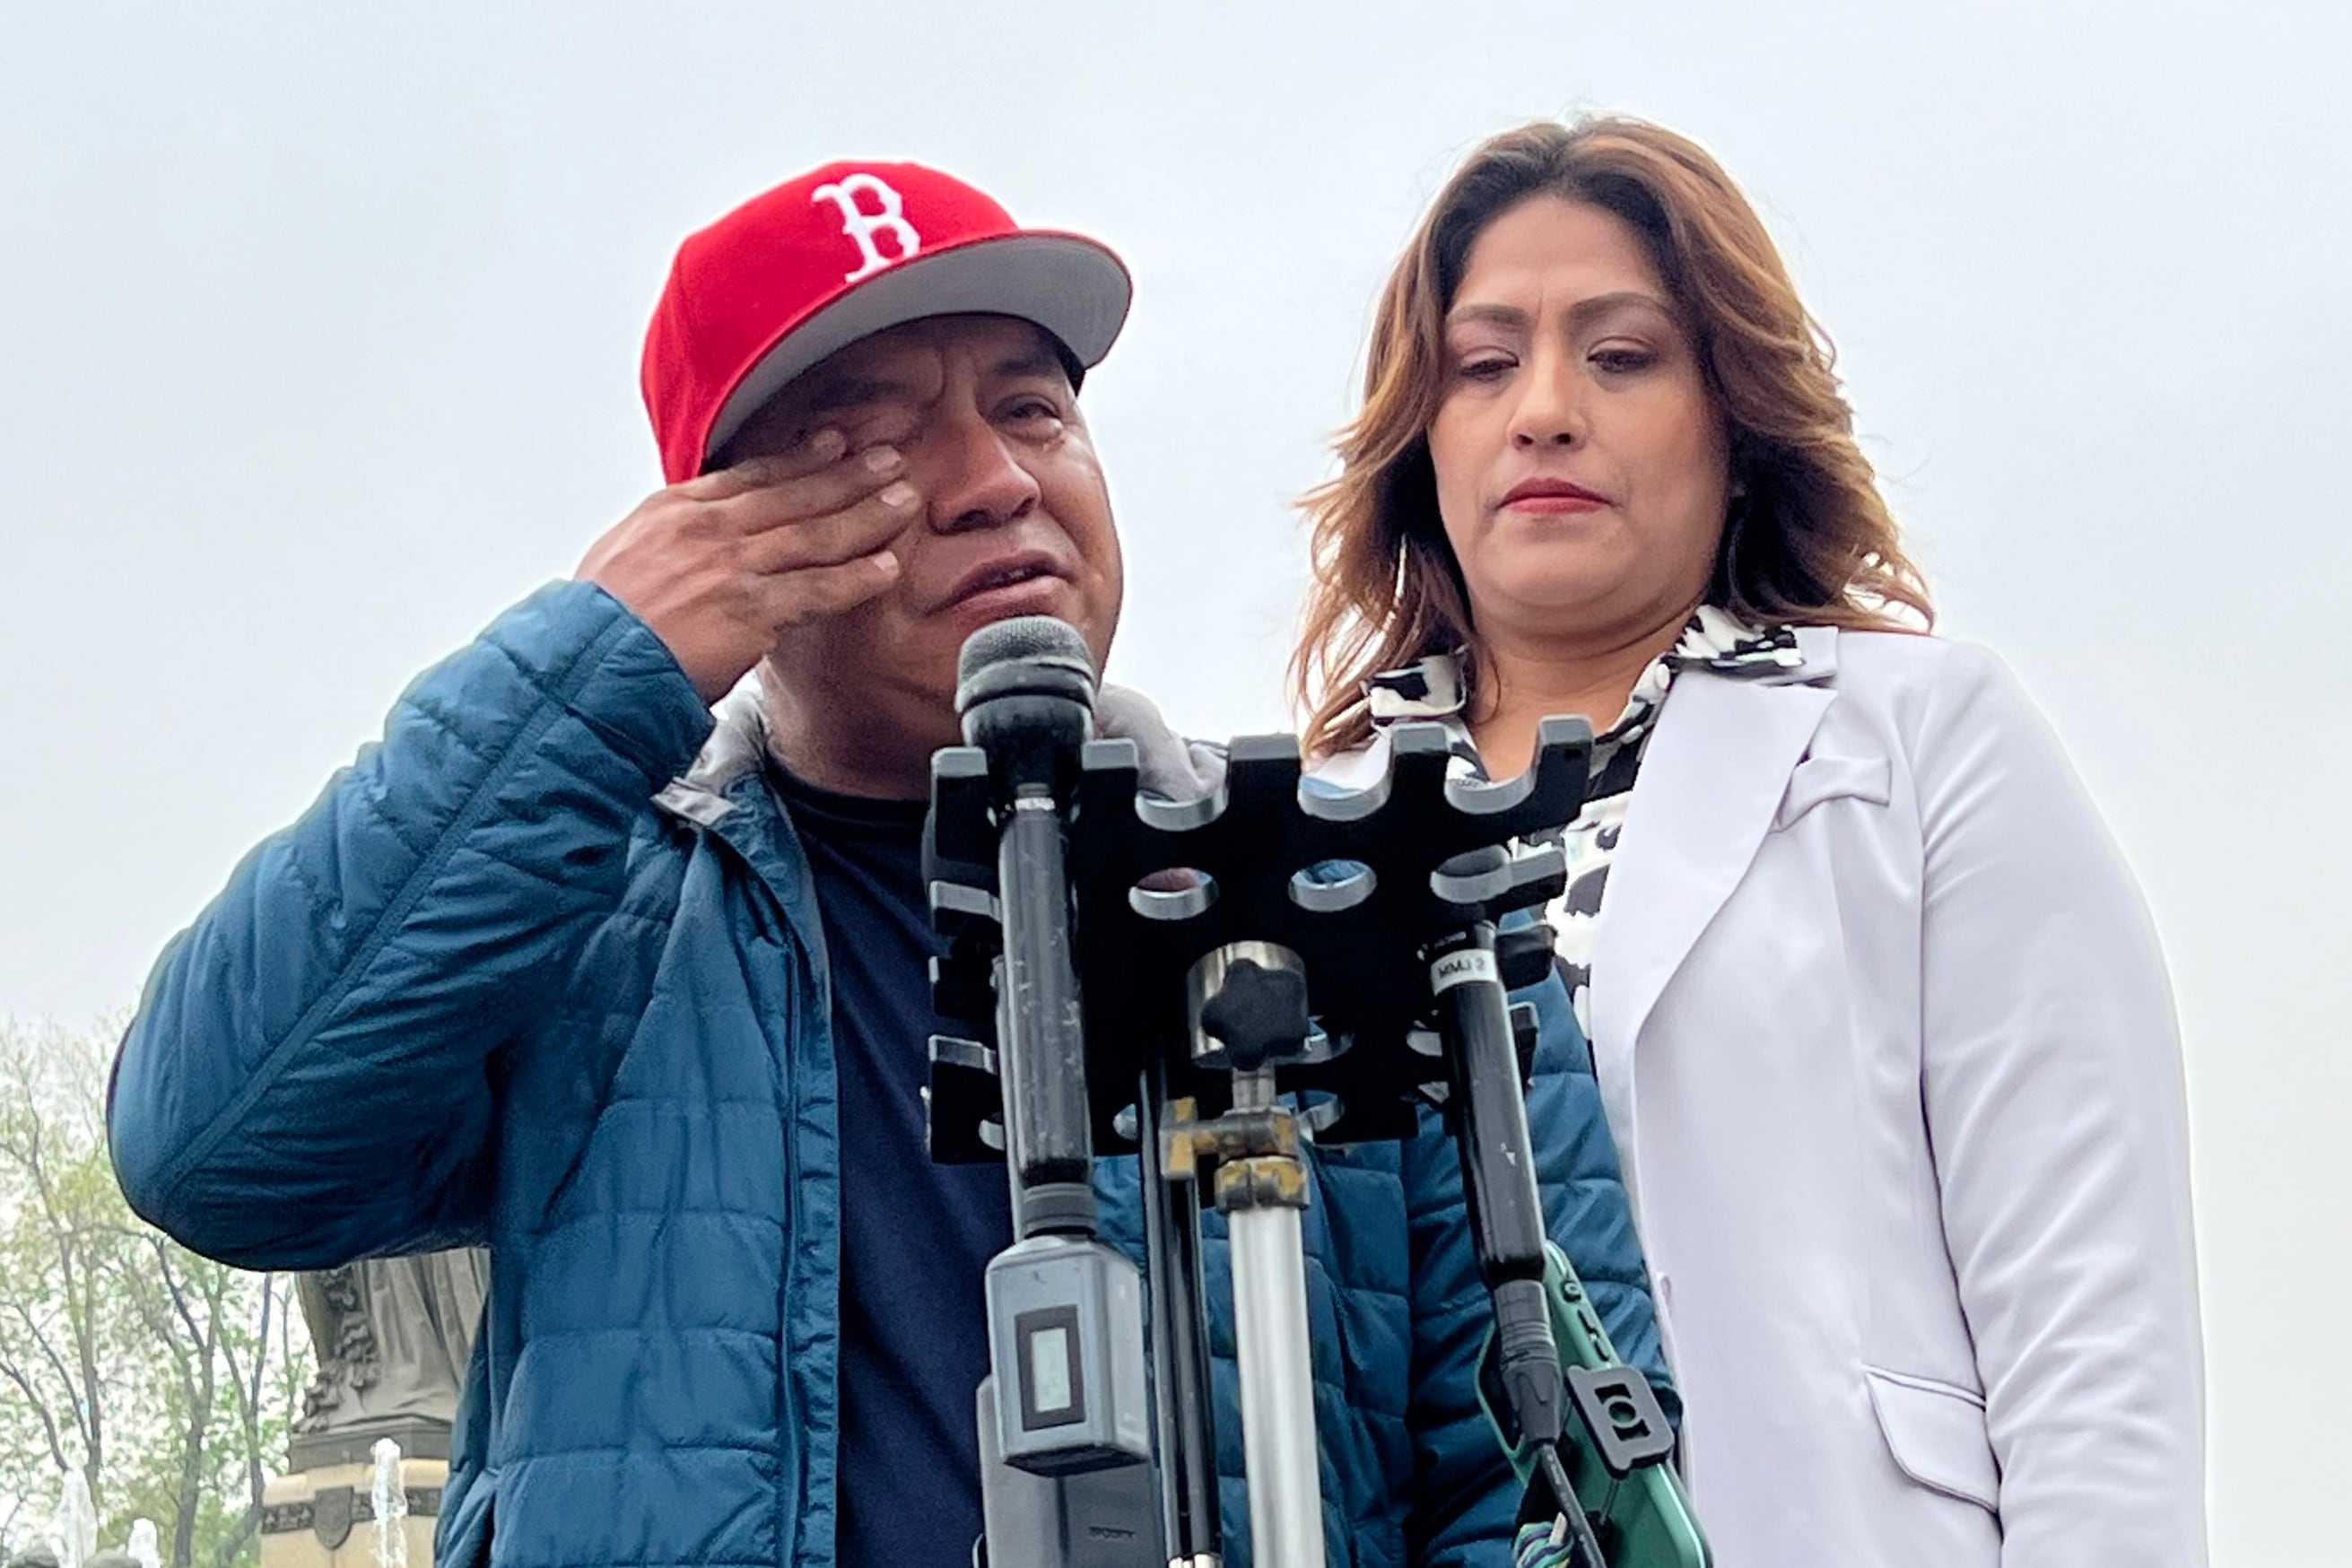 a man in a blue jacket and red cap wipes his eye while talking at a microphone next to a woman in a white suit.